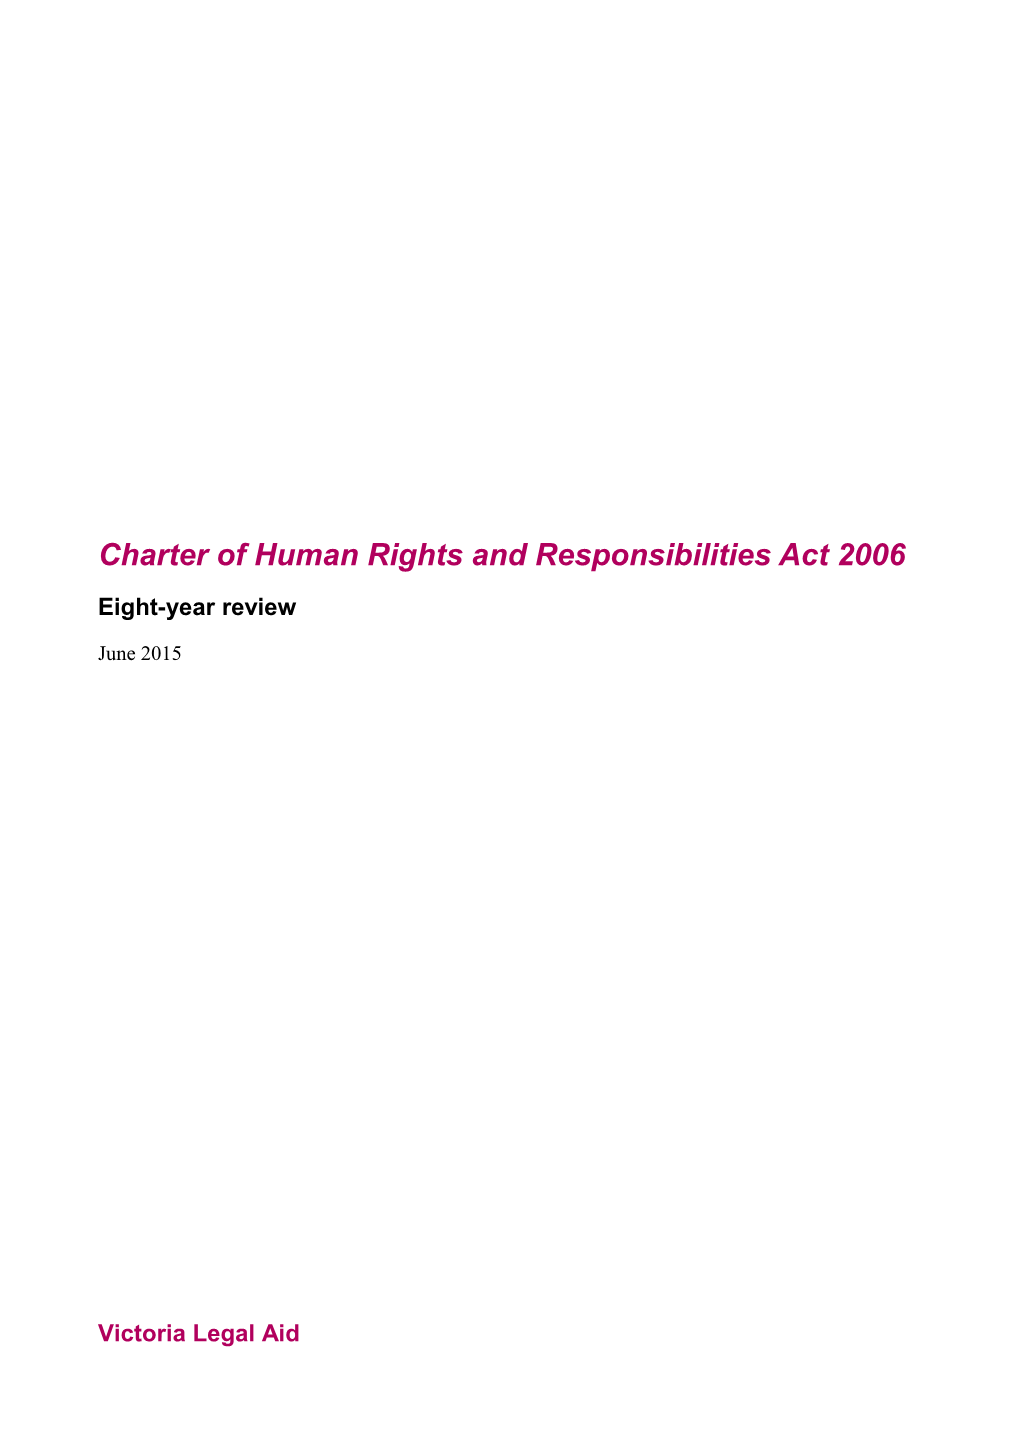 Charter of Human Rights and Responsibilities Act 2006